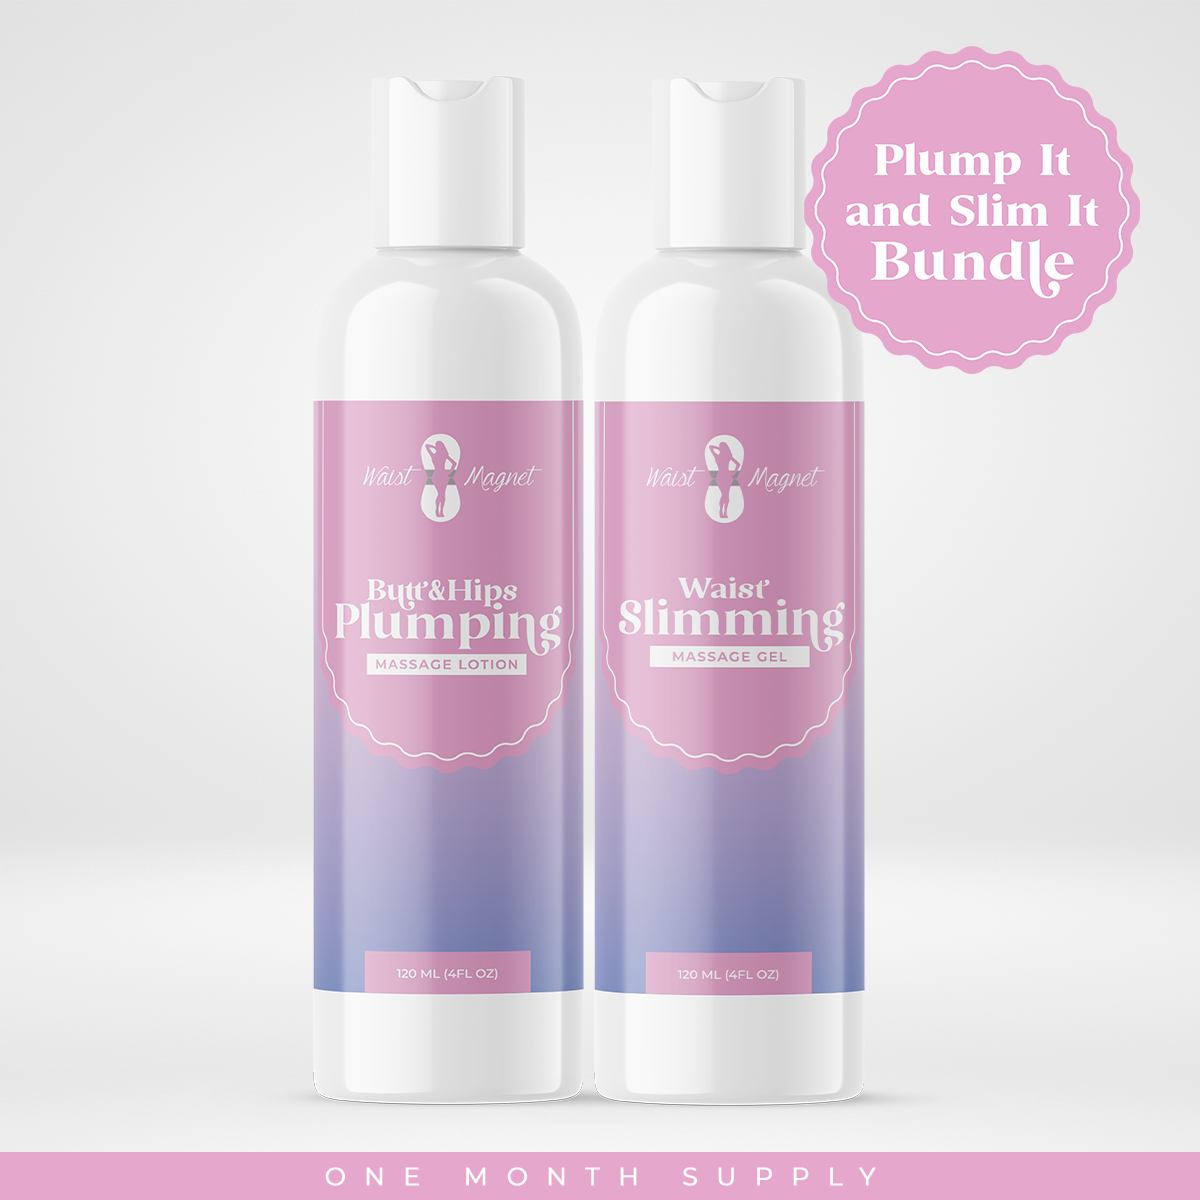 Plumping Lotion & Waist Slimming Gel Combo